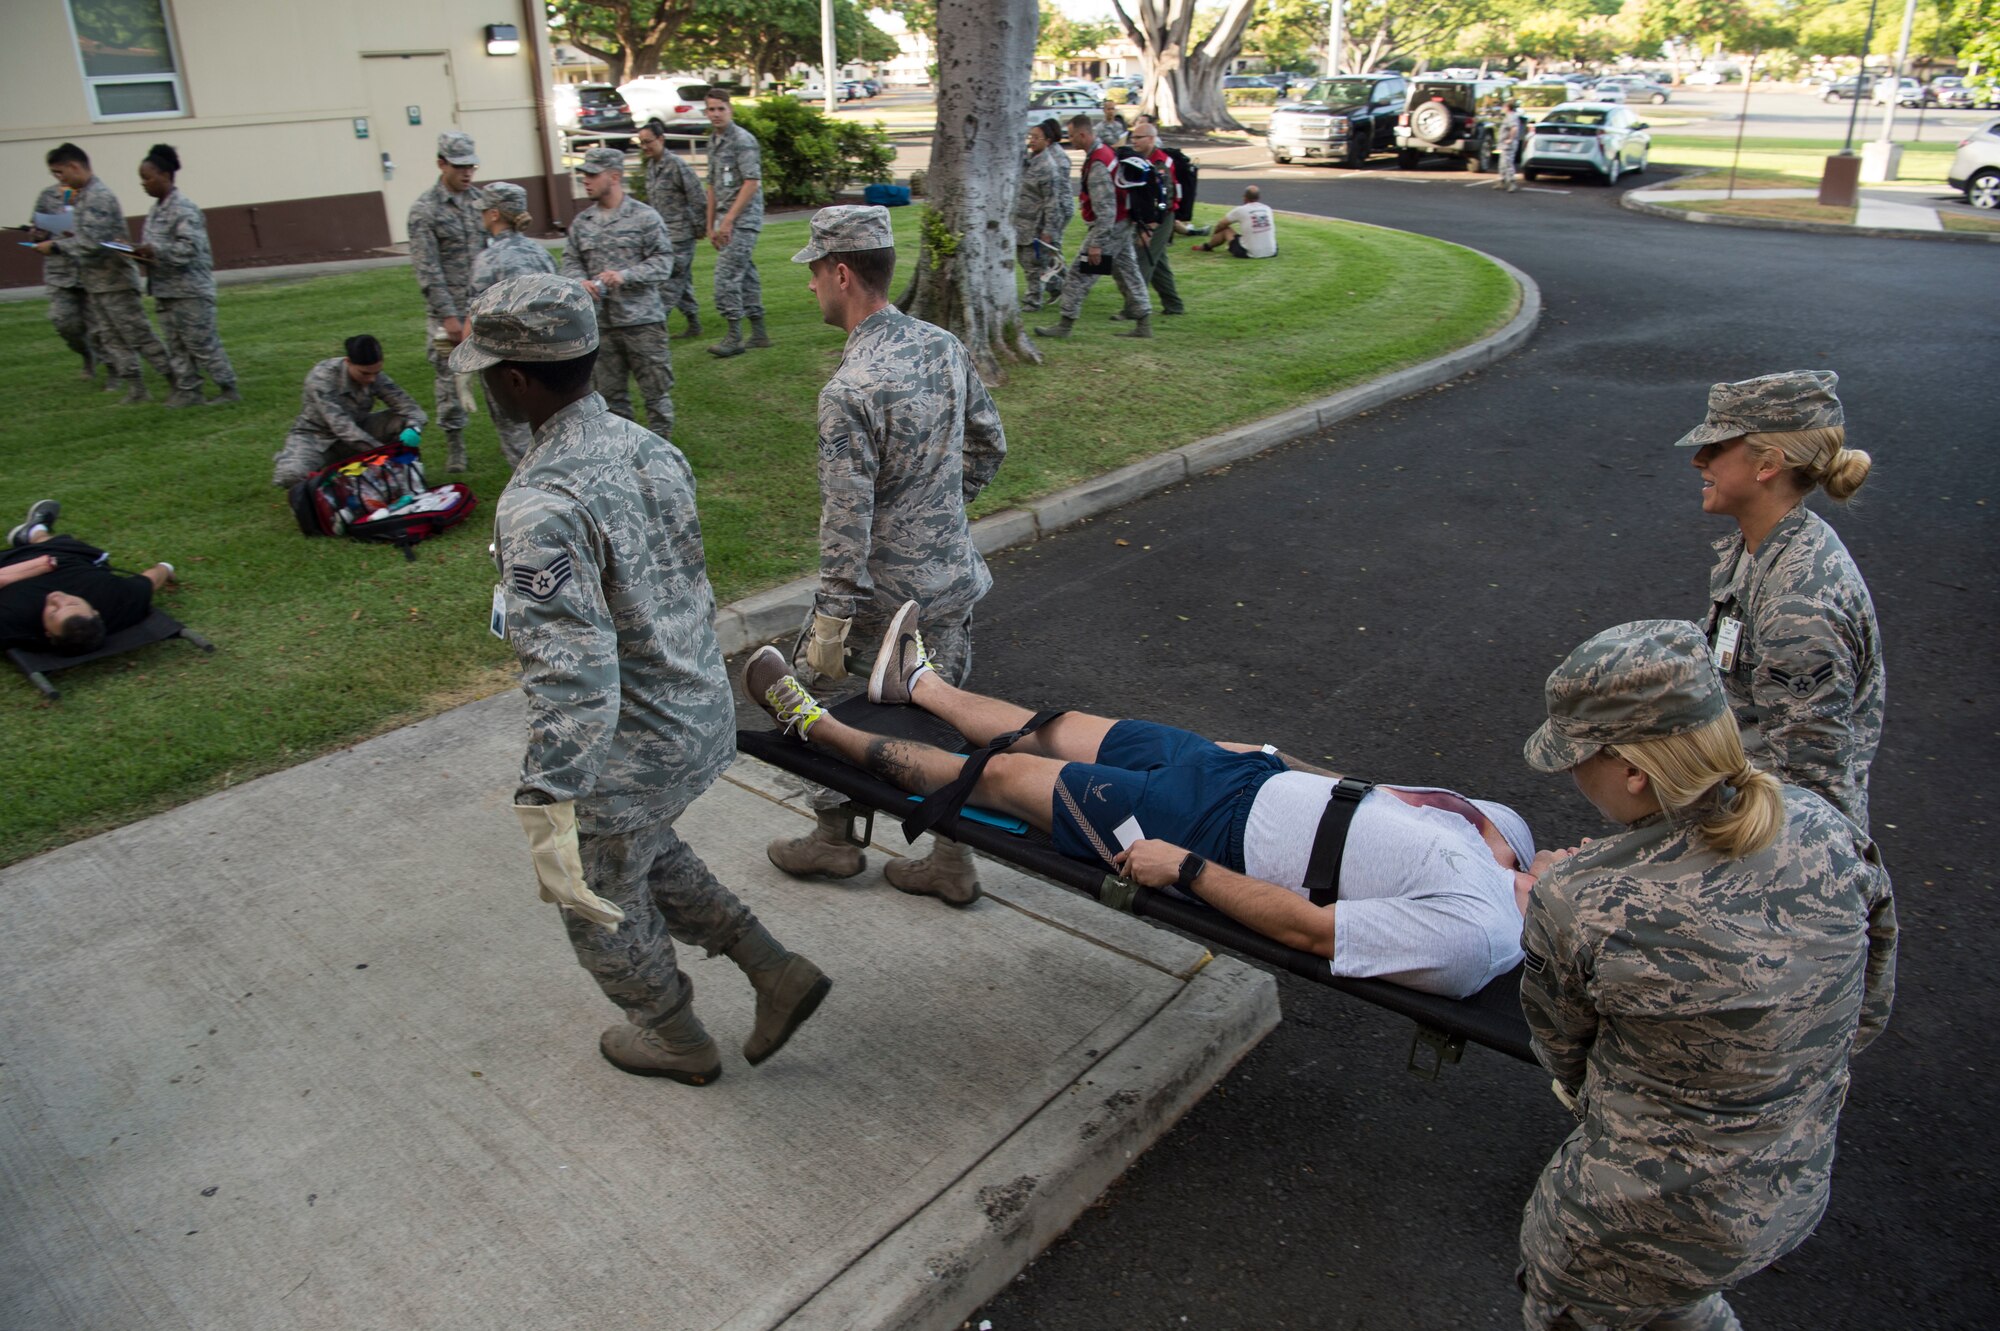 Airmen from the 15th Medical Group, work together to carry injured a simulated injured person to a centralized point at the Medical Group, during a mass-casualty scenario for Rim of the Pacific July 12, 2018. Twenty-five nations, 46 ships, five submarines, about 200 aircraft and 25,000 personnel are participating in RIMPAC from June 27 to Aug. 2 in and around the Hawaiian Islands and Southern California. The world’s largest international maritime exercise, RIMPAC provides a unique training opportunity while fostering and sustaining cooperative relationships among participants critical to ensuring the safety of sea lanes and security of the world’s oceans. RIMPAC 2018 is the 26th exercise in the series that began in 1971. (U.S. Air Force photo by Tech. Sgt. Heather Redman)